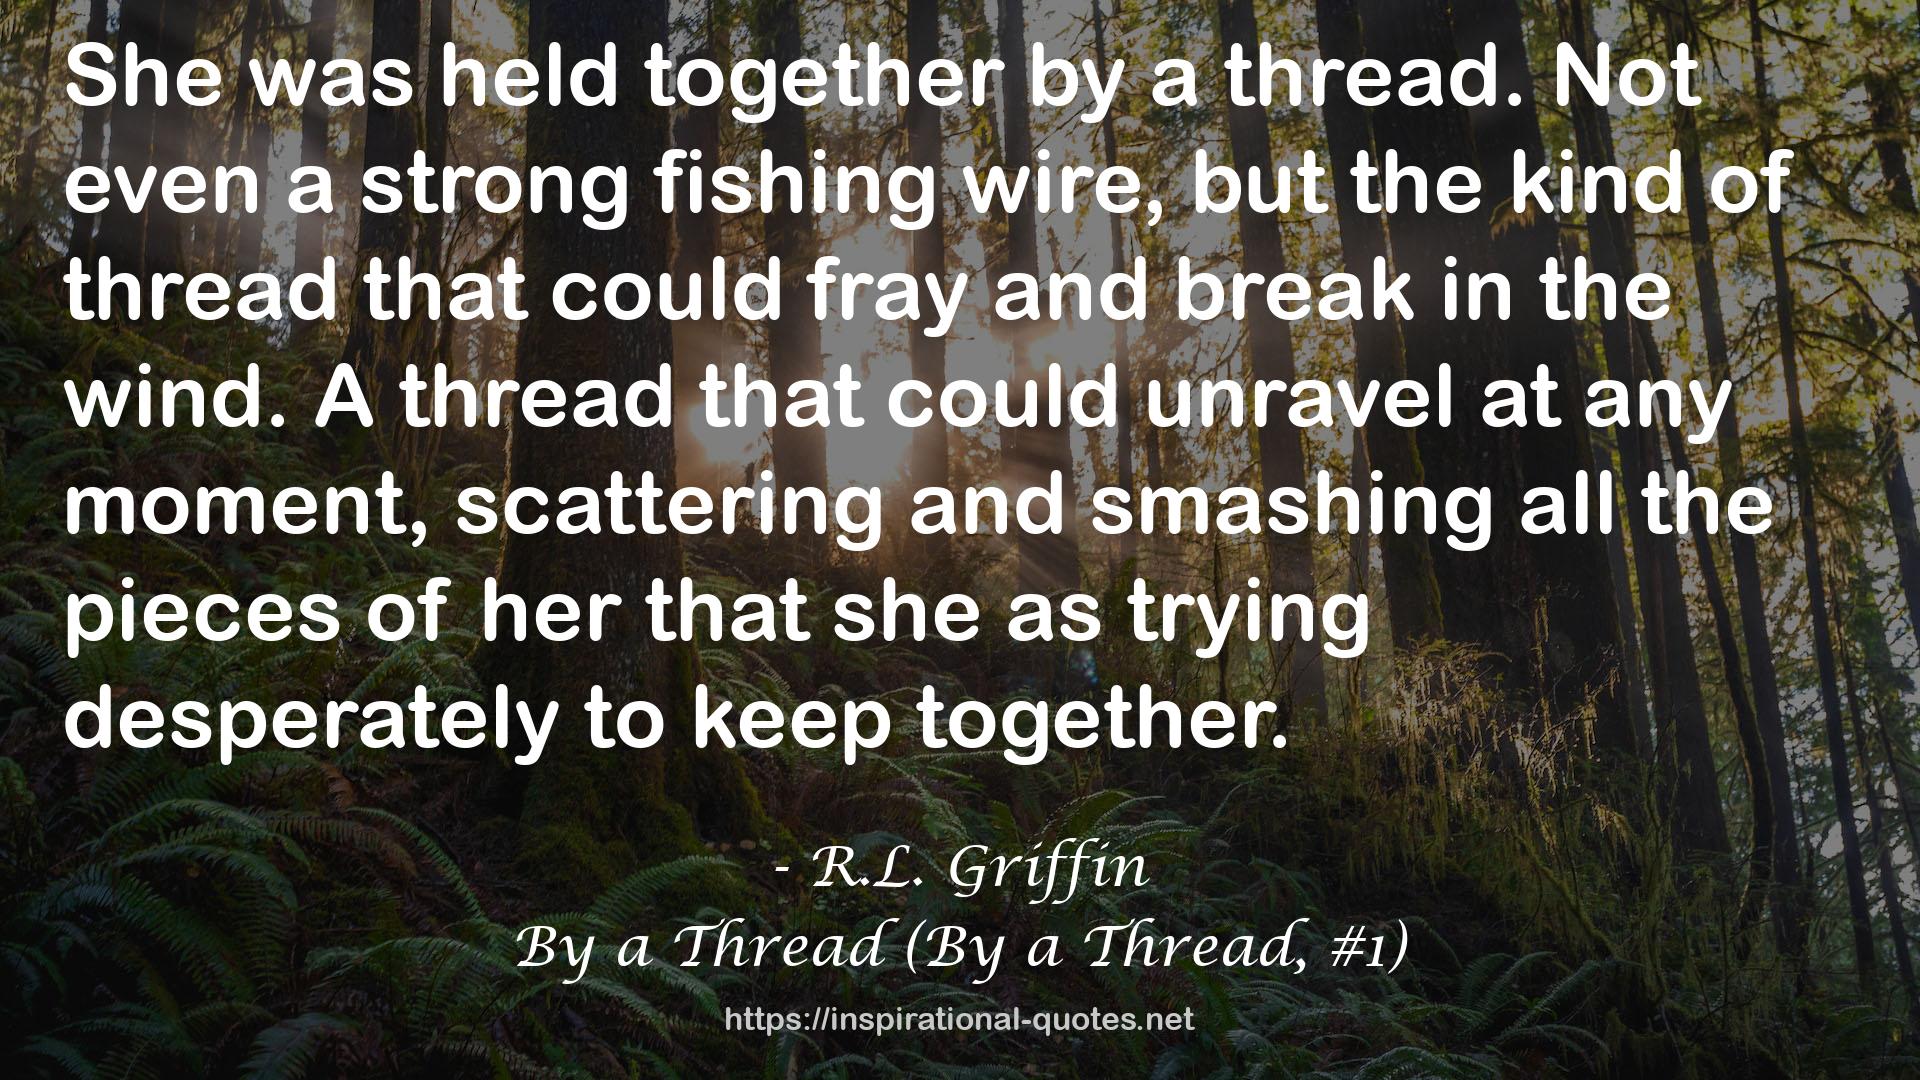 By a Thread (By a Thread, #1) QUOTES